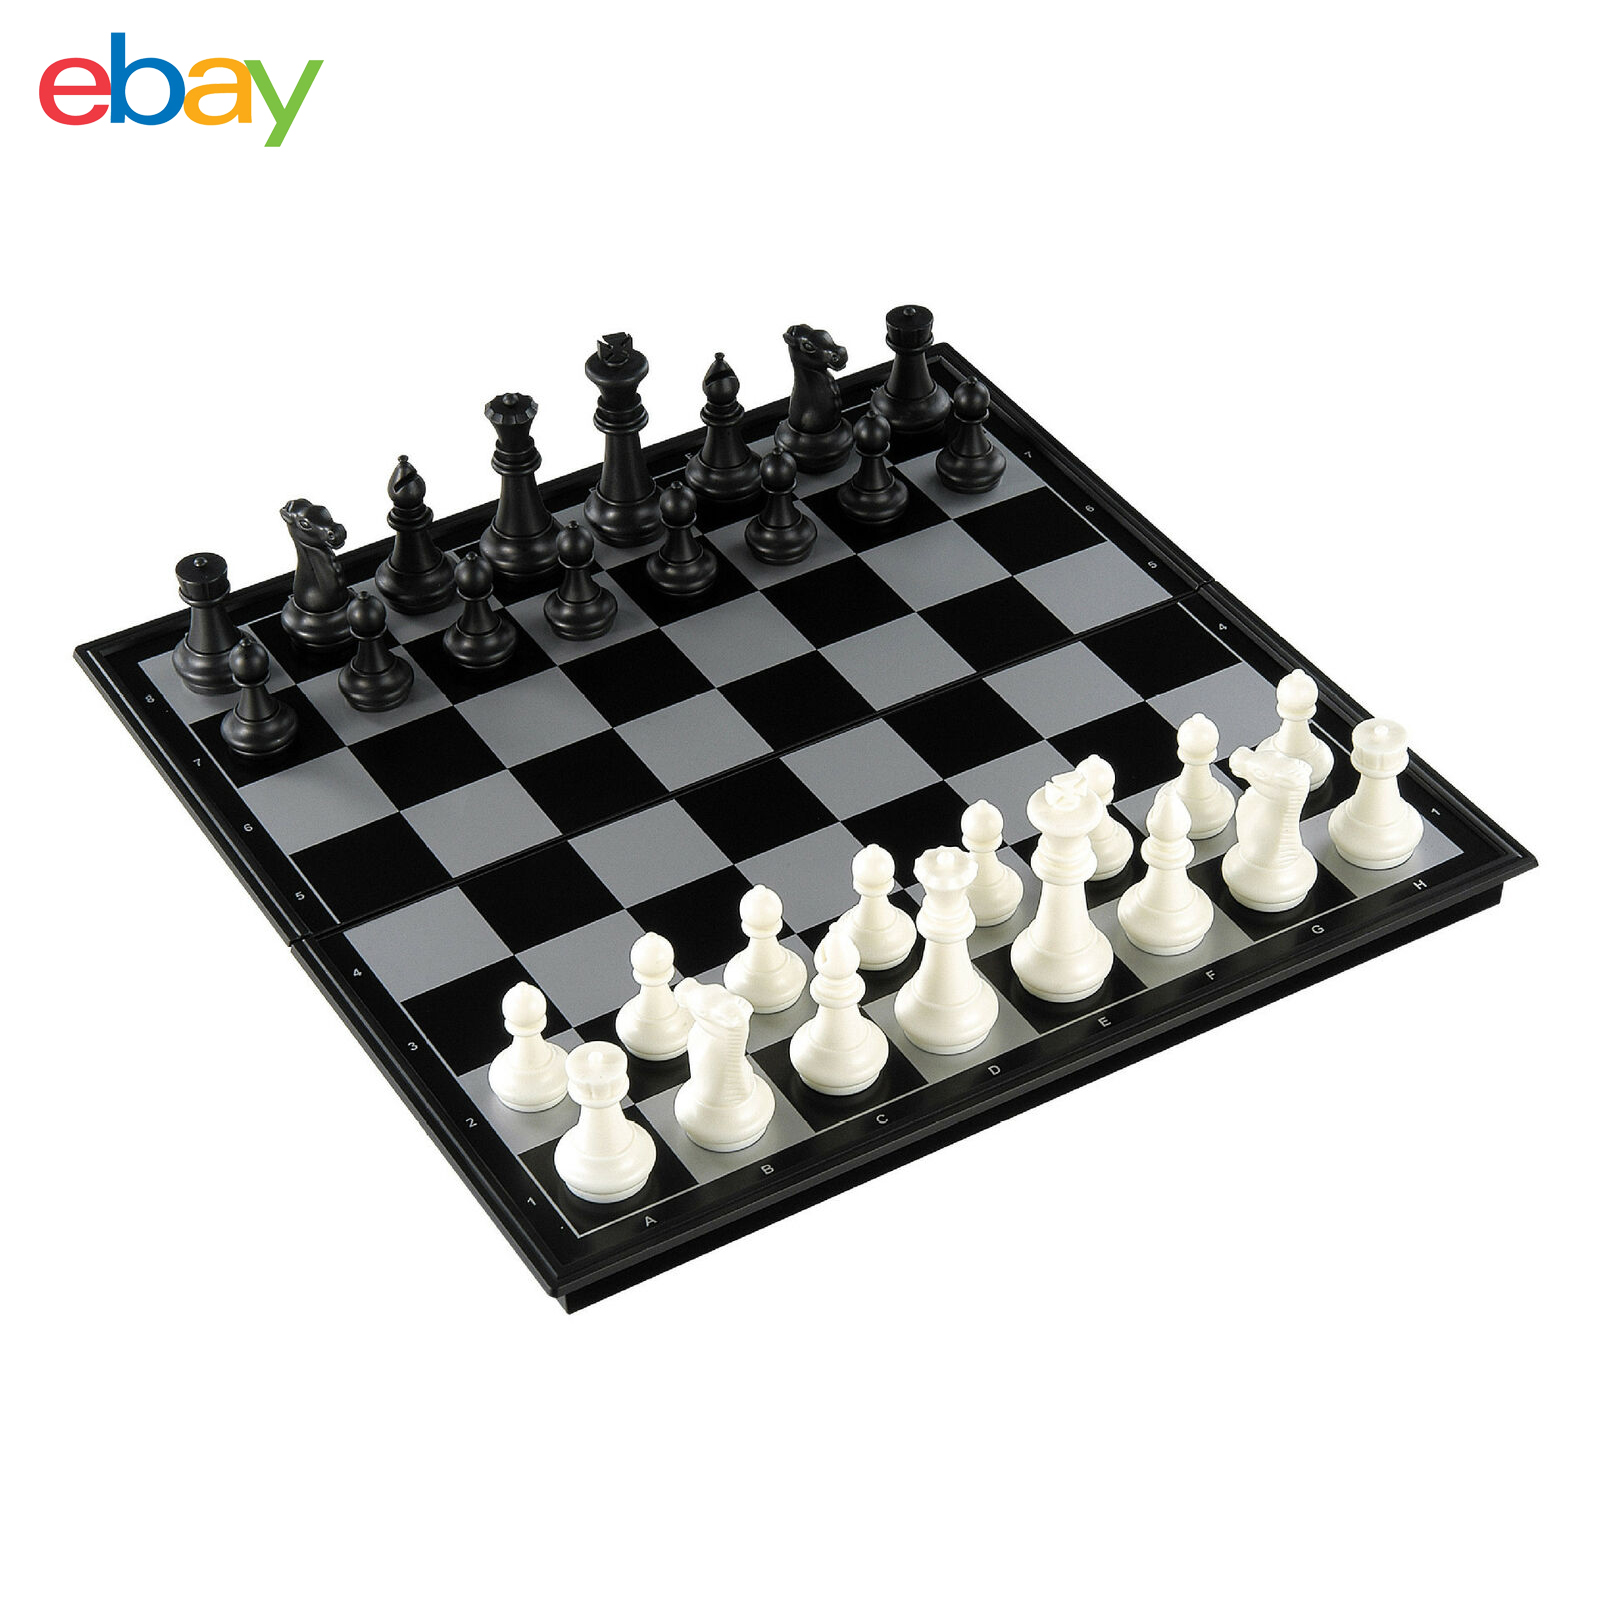 Three-in-one chess set